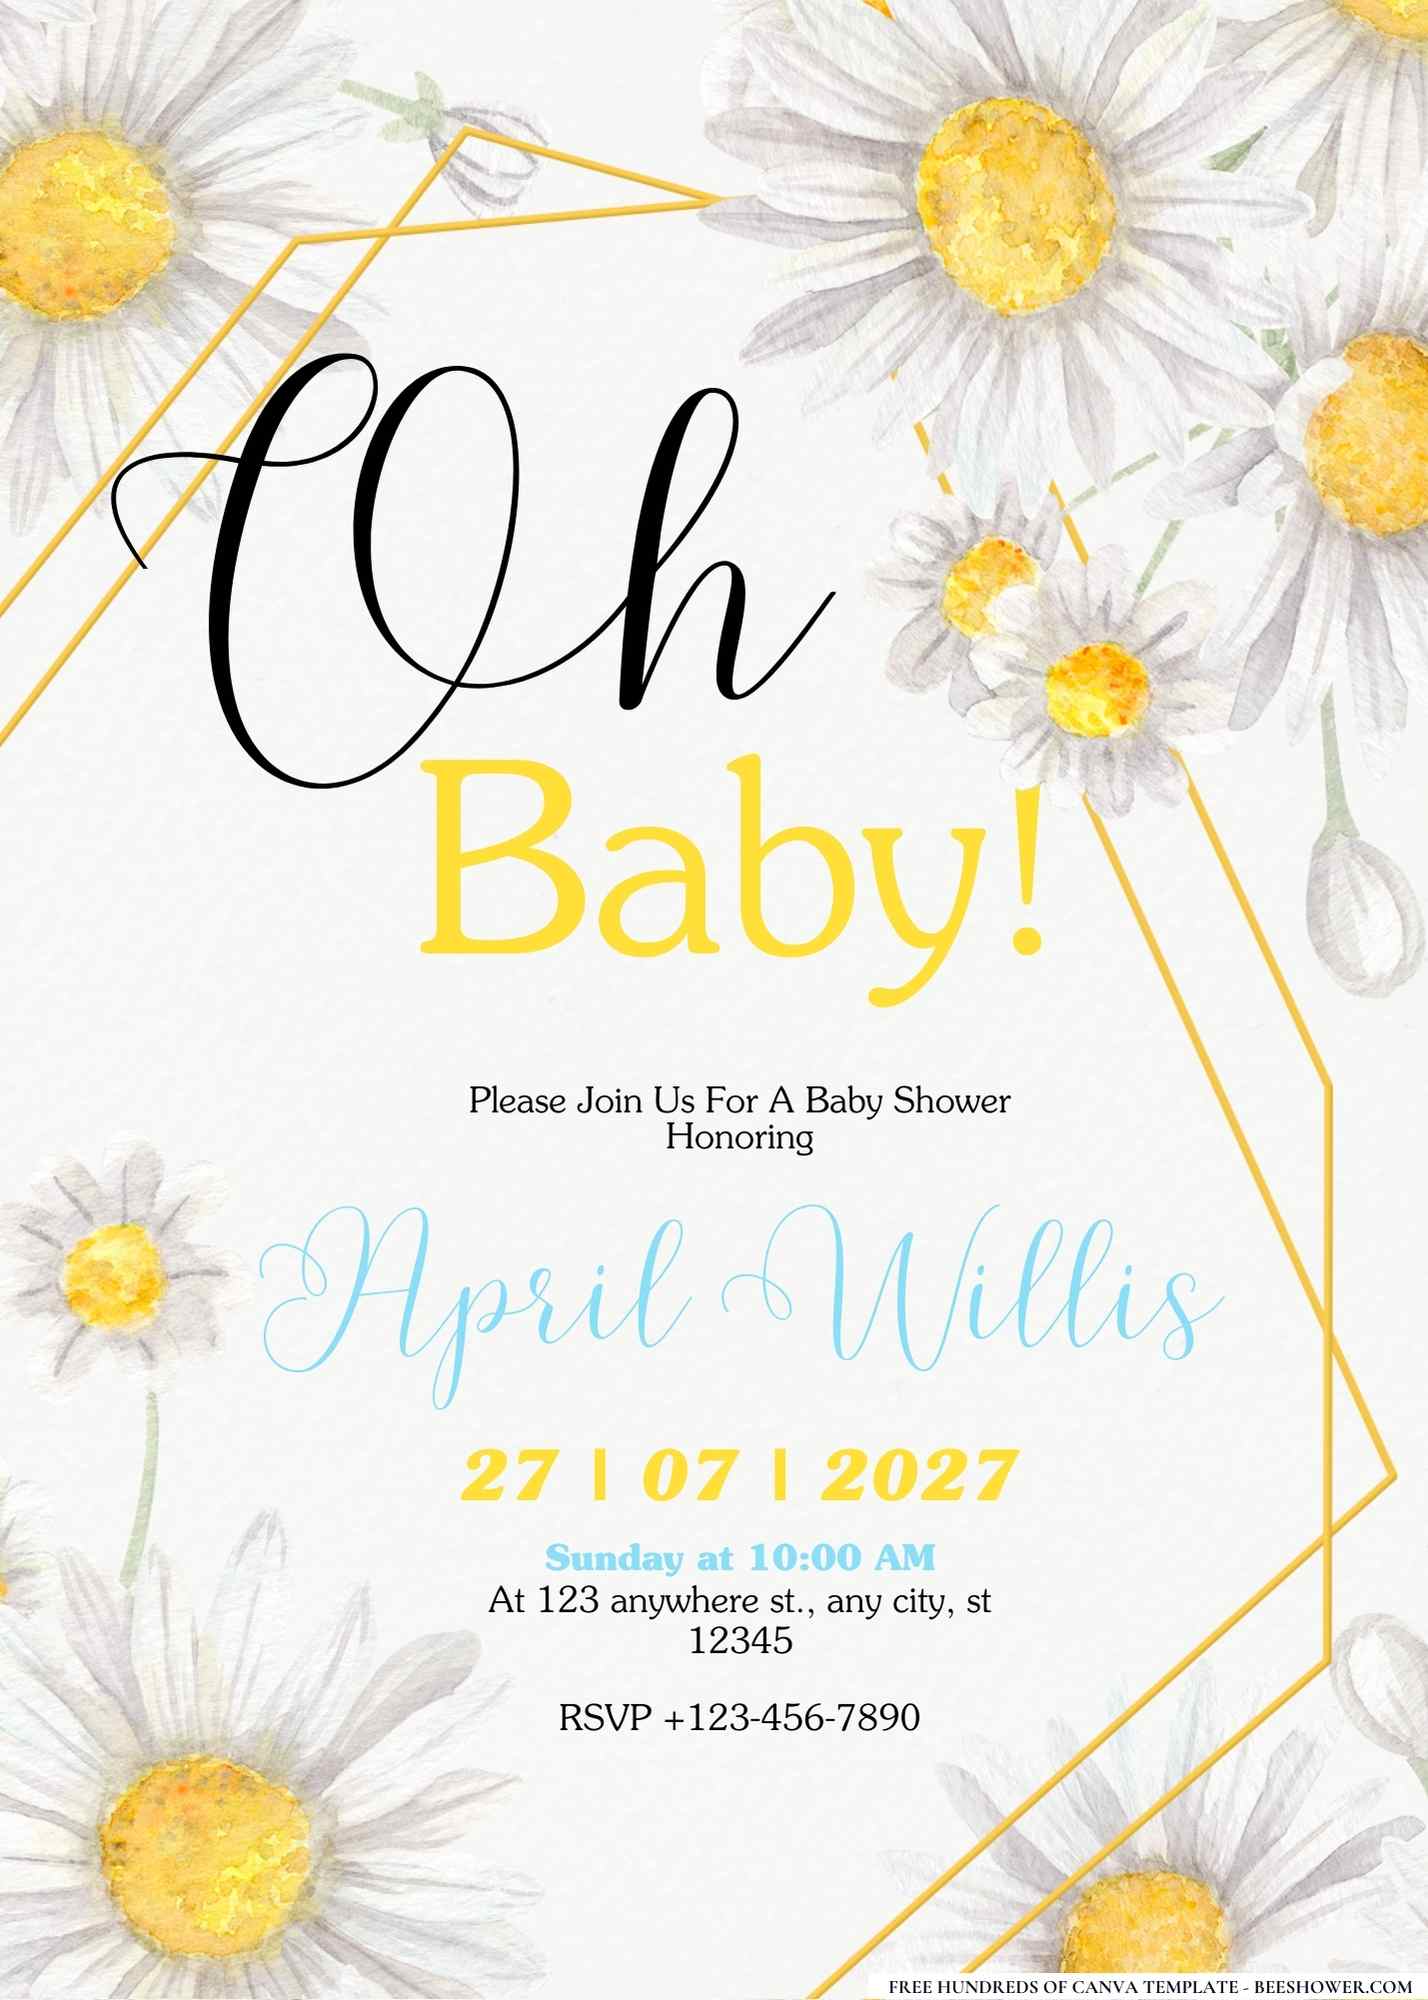 Daisy Chains of Delight Baby Shower Invitation